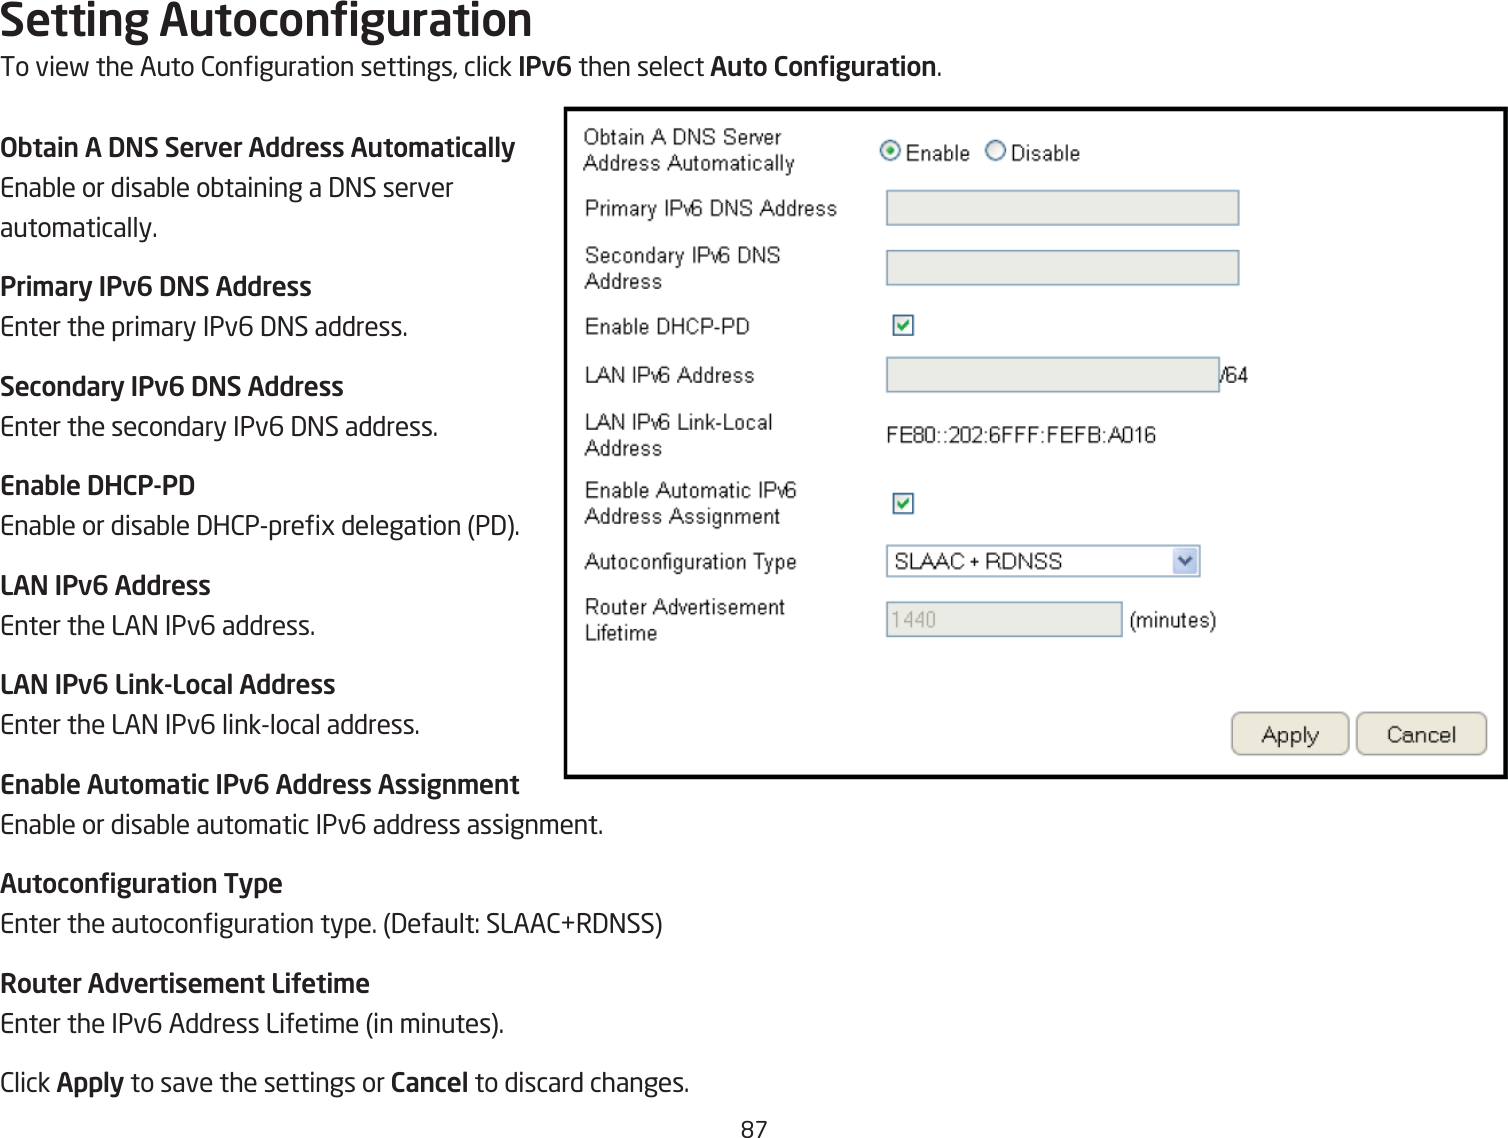 &apos;&amp;Setting AutocongurationTo vief the Auto 2onguration settings, click IPv6 then select Auto Conguration.Obtain A DNS Server Address Auto\aticallyEnaQle or disaQle oQtaining a 3=S server automatically.Pri\ary IPv6 DNS AddressEnter the primary IPv6 3=S address.Secondary IPv6 DNS AddressEnter the secondary IPv6 3=S address.Enable DHCP-PDEnaQle or disaQle 3H2Ppreg delegation P3.LAN IPv6 AddressEnter the LA= IPv6 address.LAN IPv6 Link-Local AddressEnter the LA= IPv6 linklocal address.Enable Auto\atic IPv6 Address Assign\entEnaQle or disaQle automatic IPv6 address assignment.Autoconguration TypeEnter the autoconguration type. 3efault: SLAA2R3=SSRouter Advertise\ent LiUeti\eEnter the IPv6 Address Lifetime in minutes.2lick Apply to save the settings or Cancel to discard changes.